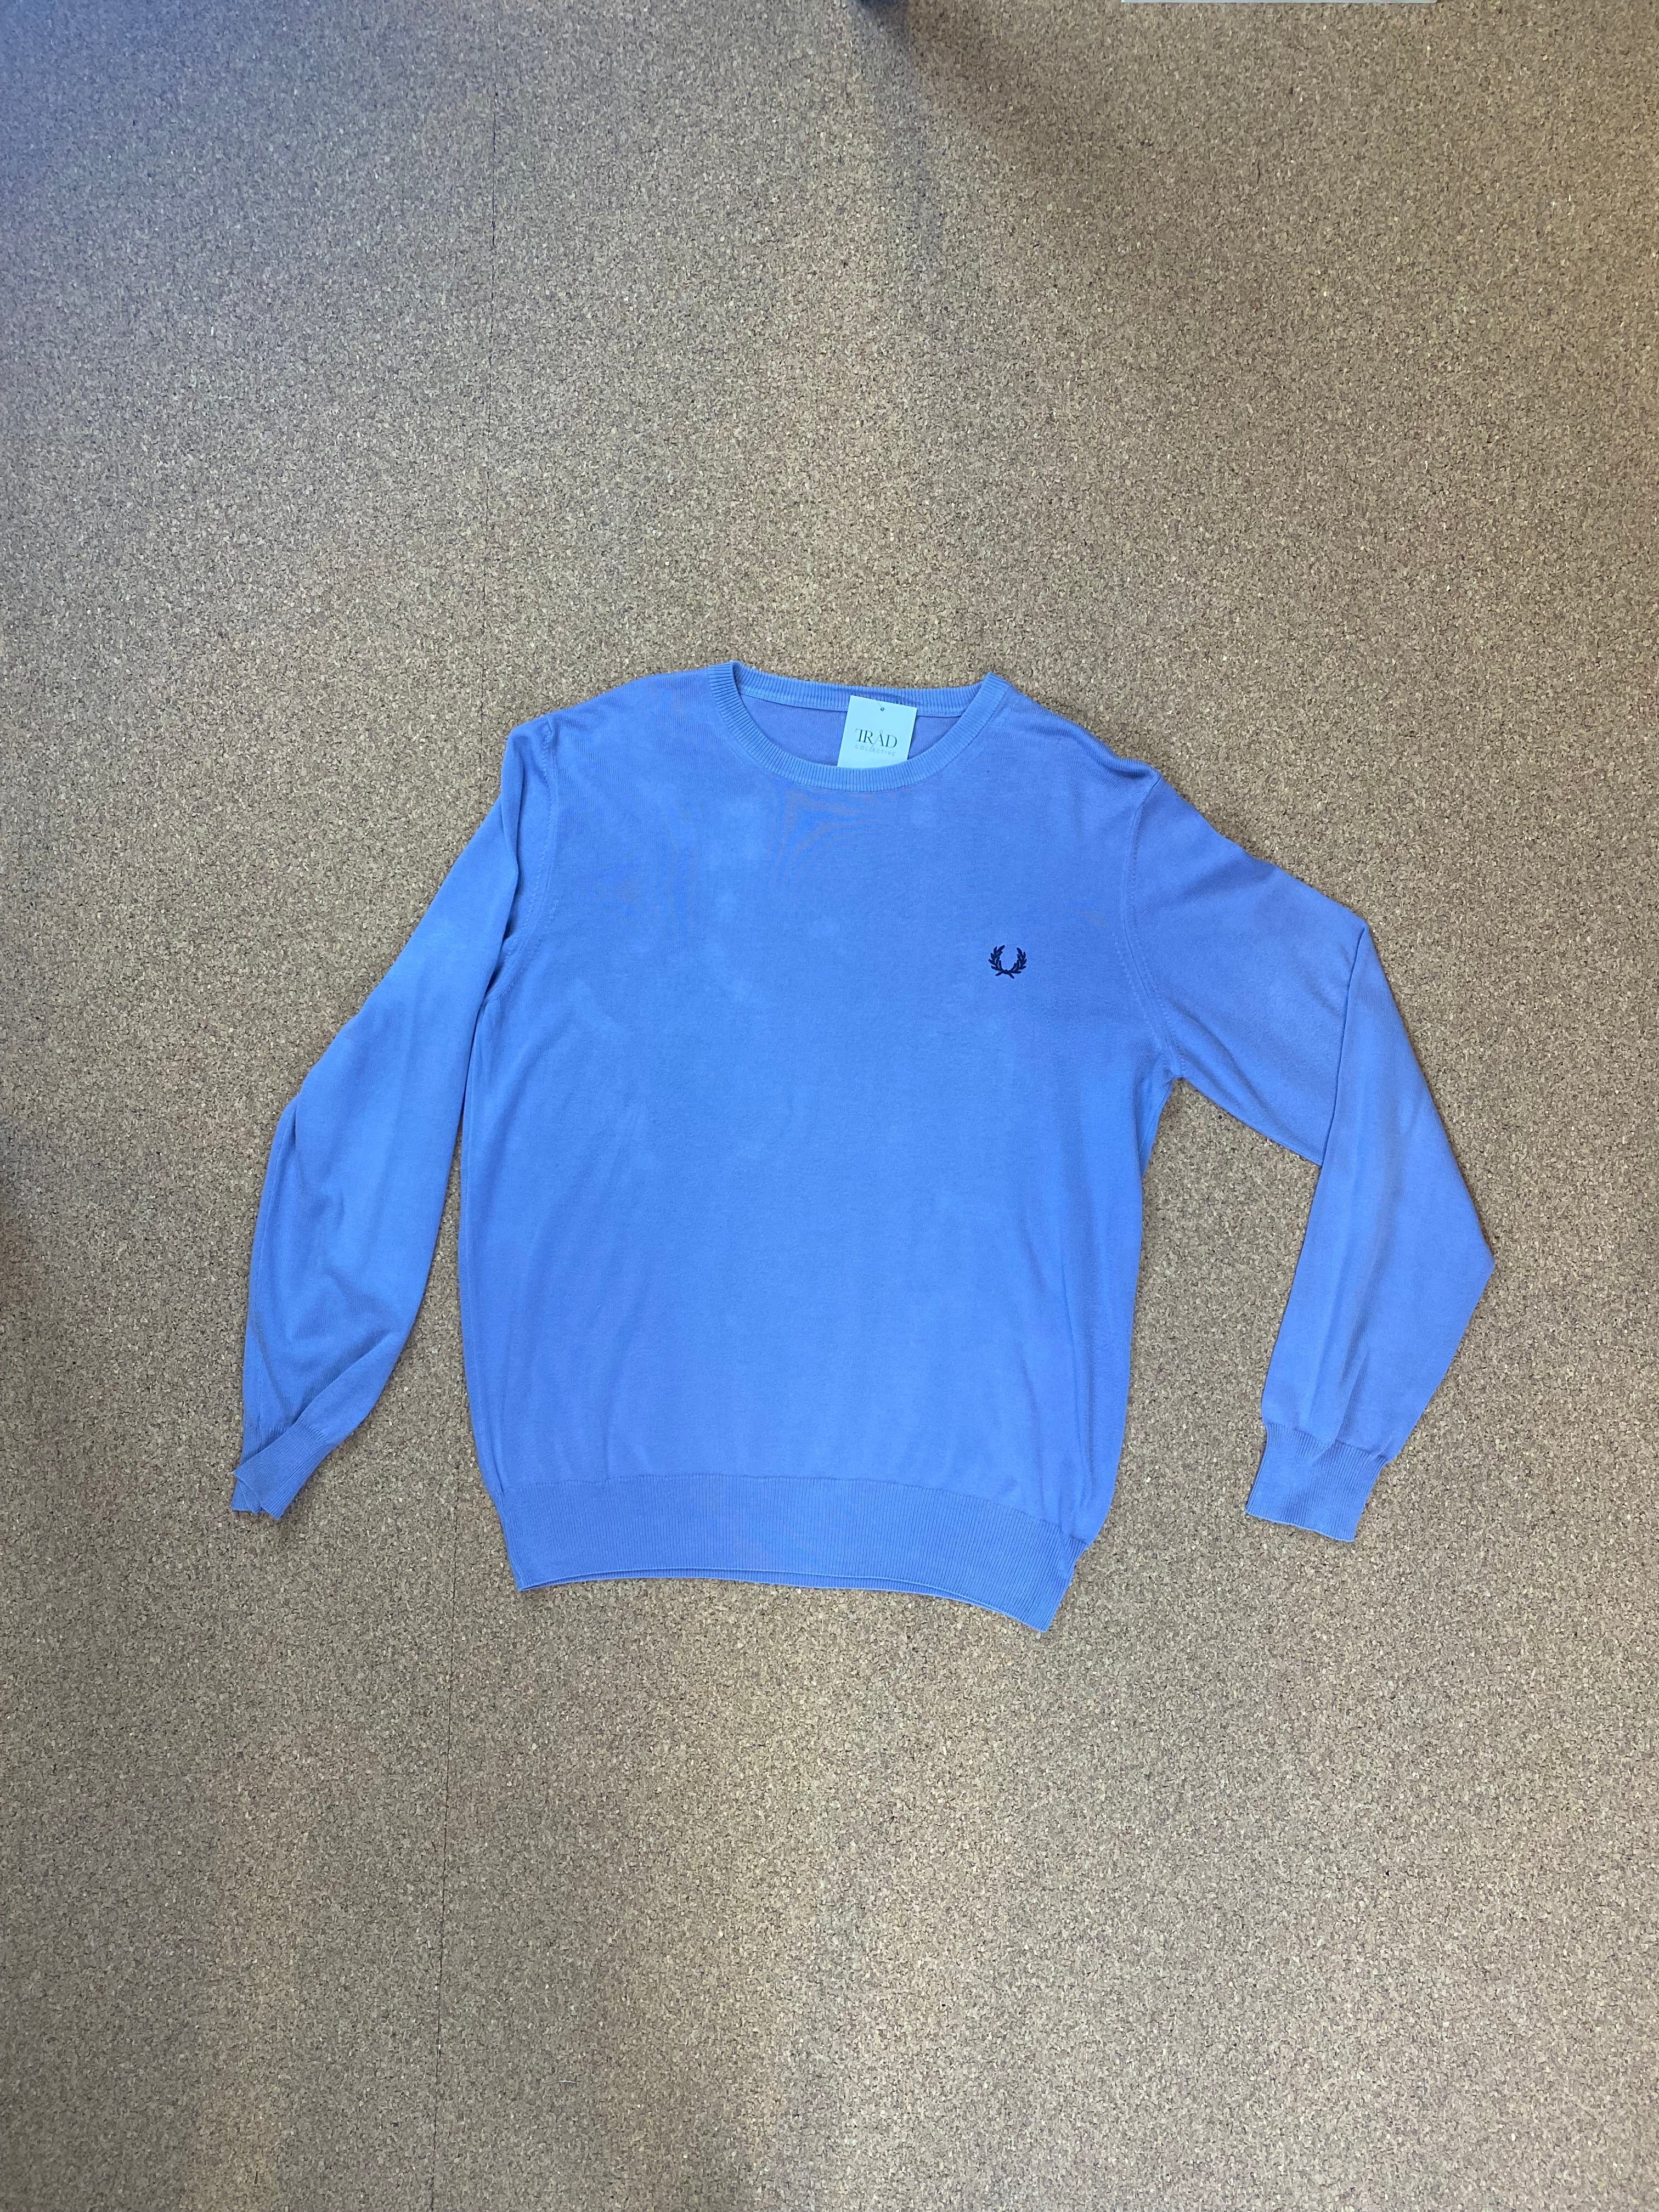 Fred Perry Lilac jumper Men's size M